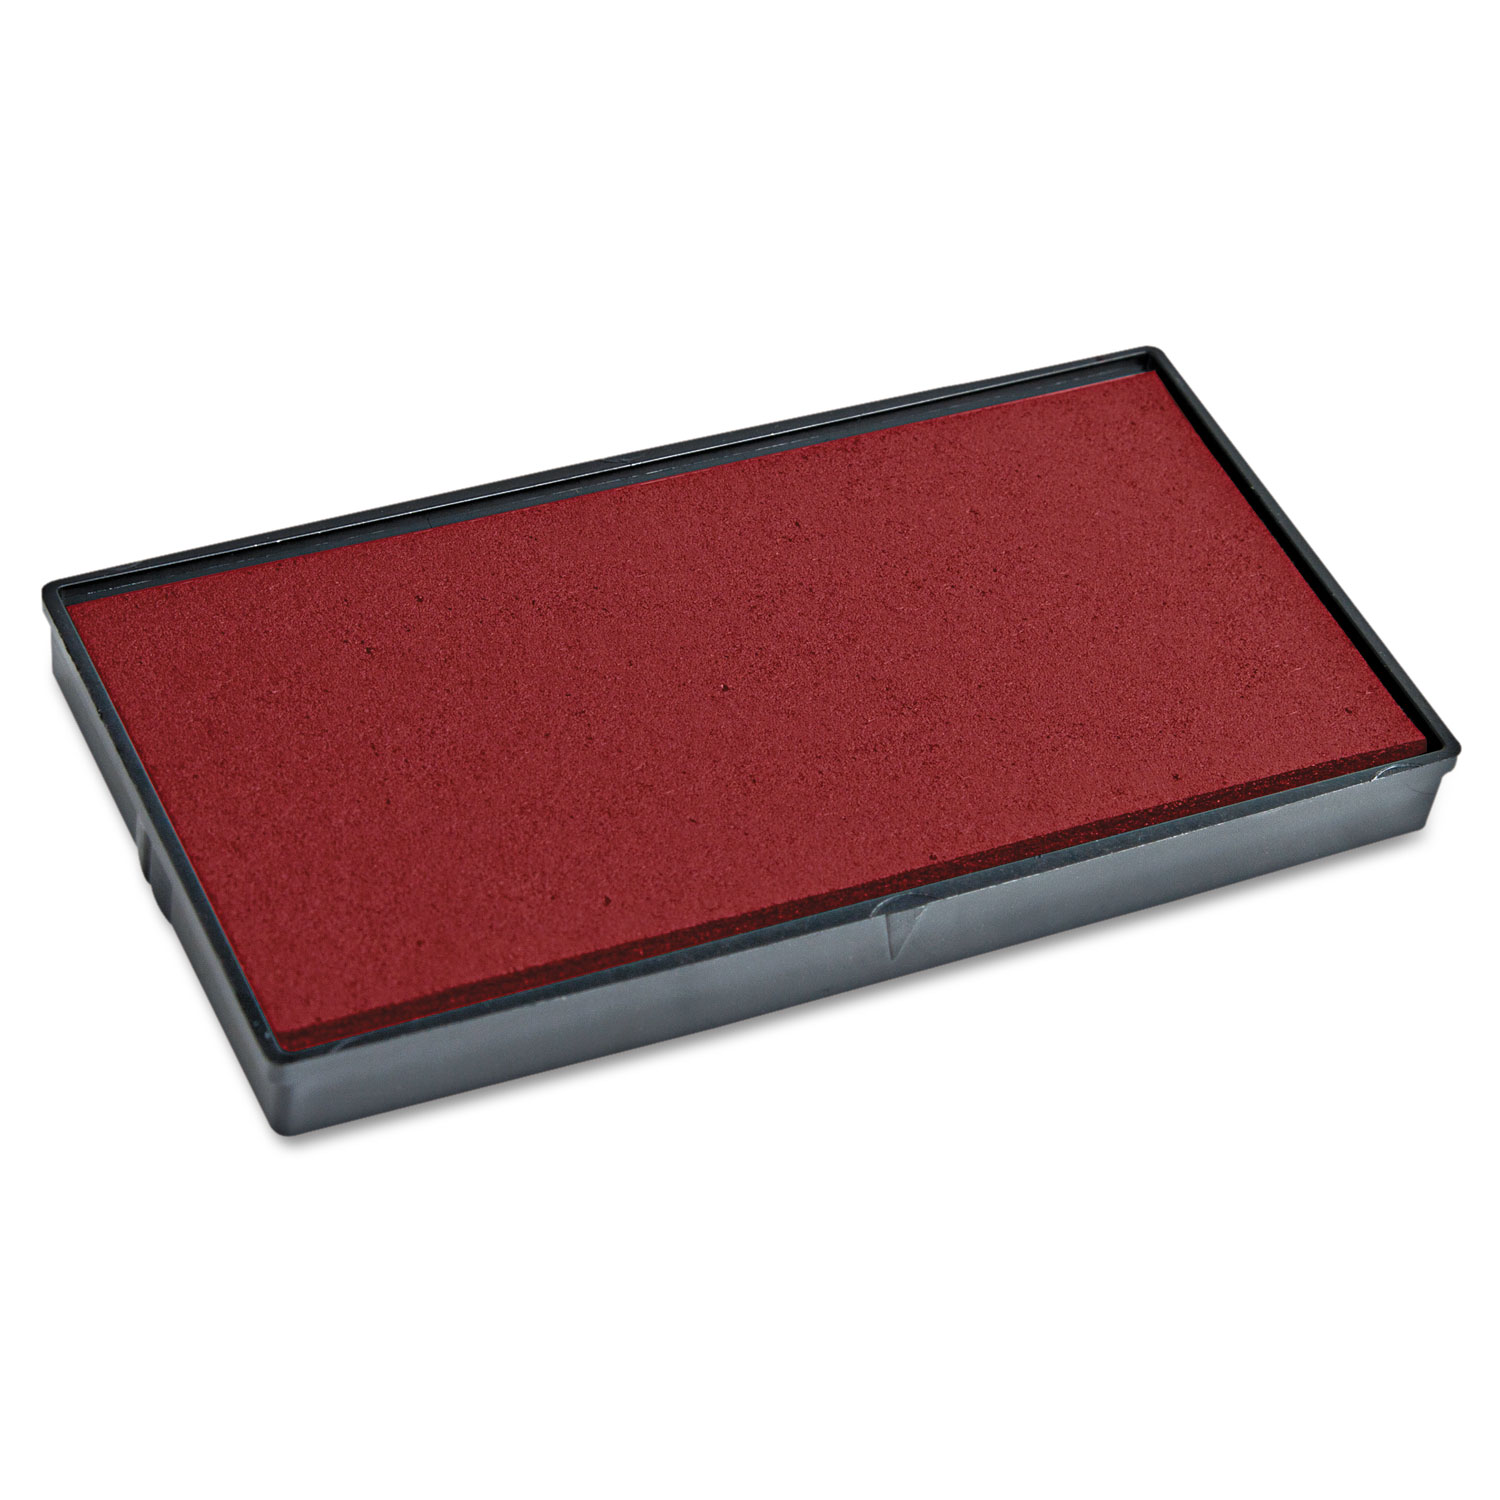 Replacement Ink Pad for 2000PLUS 1SI40PGL & 1SI40P, Red